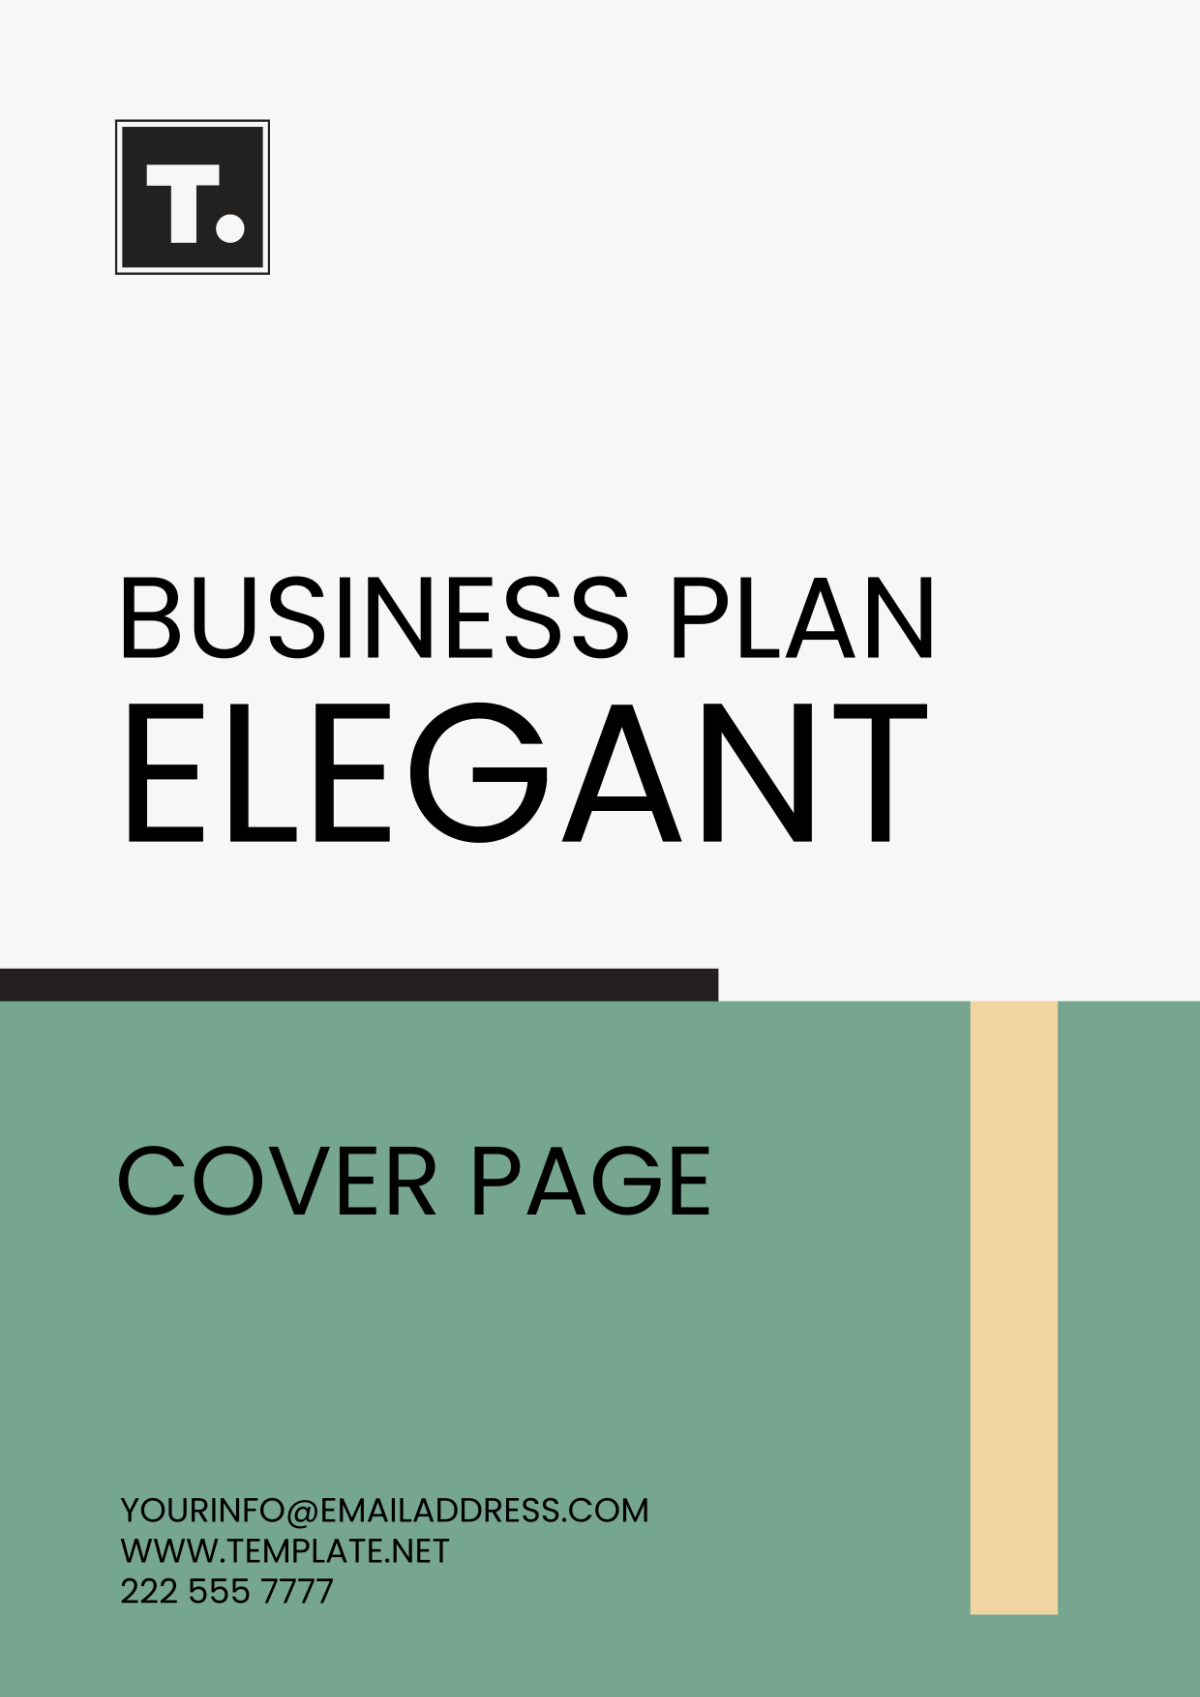 Business Plan Elegant Cover Page